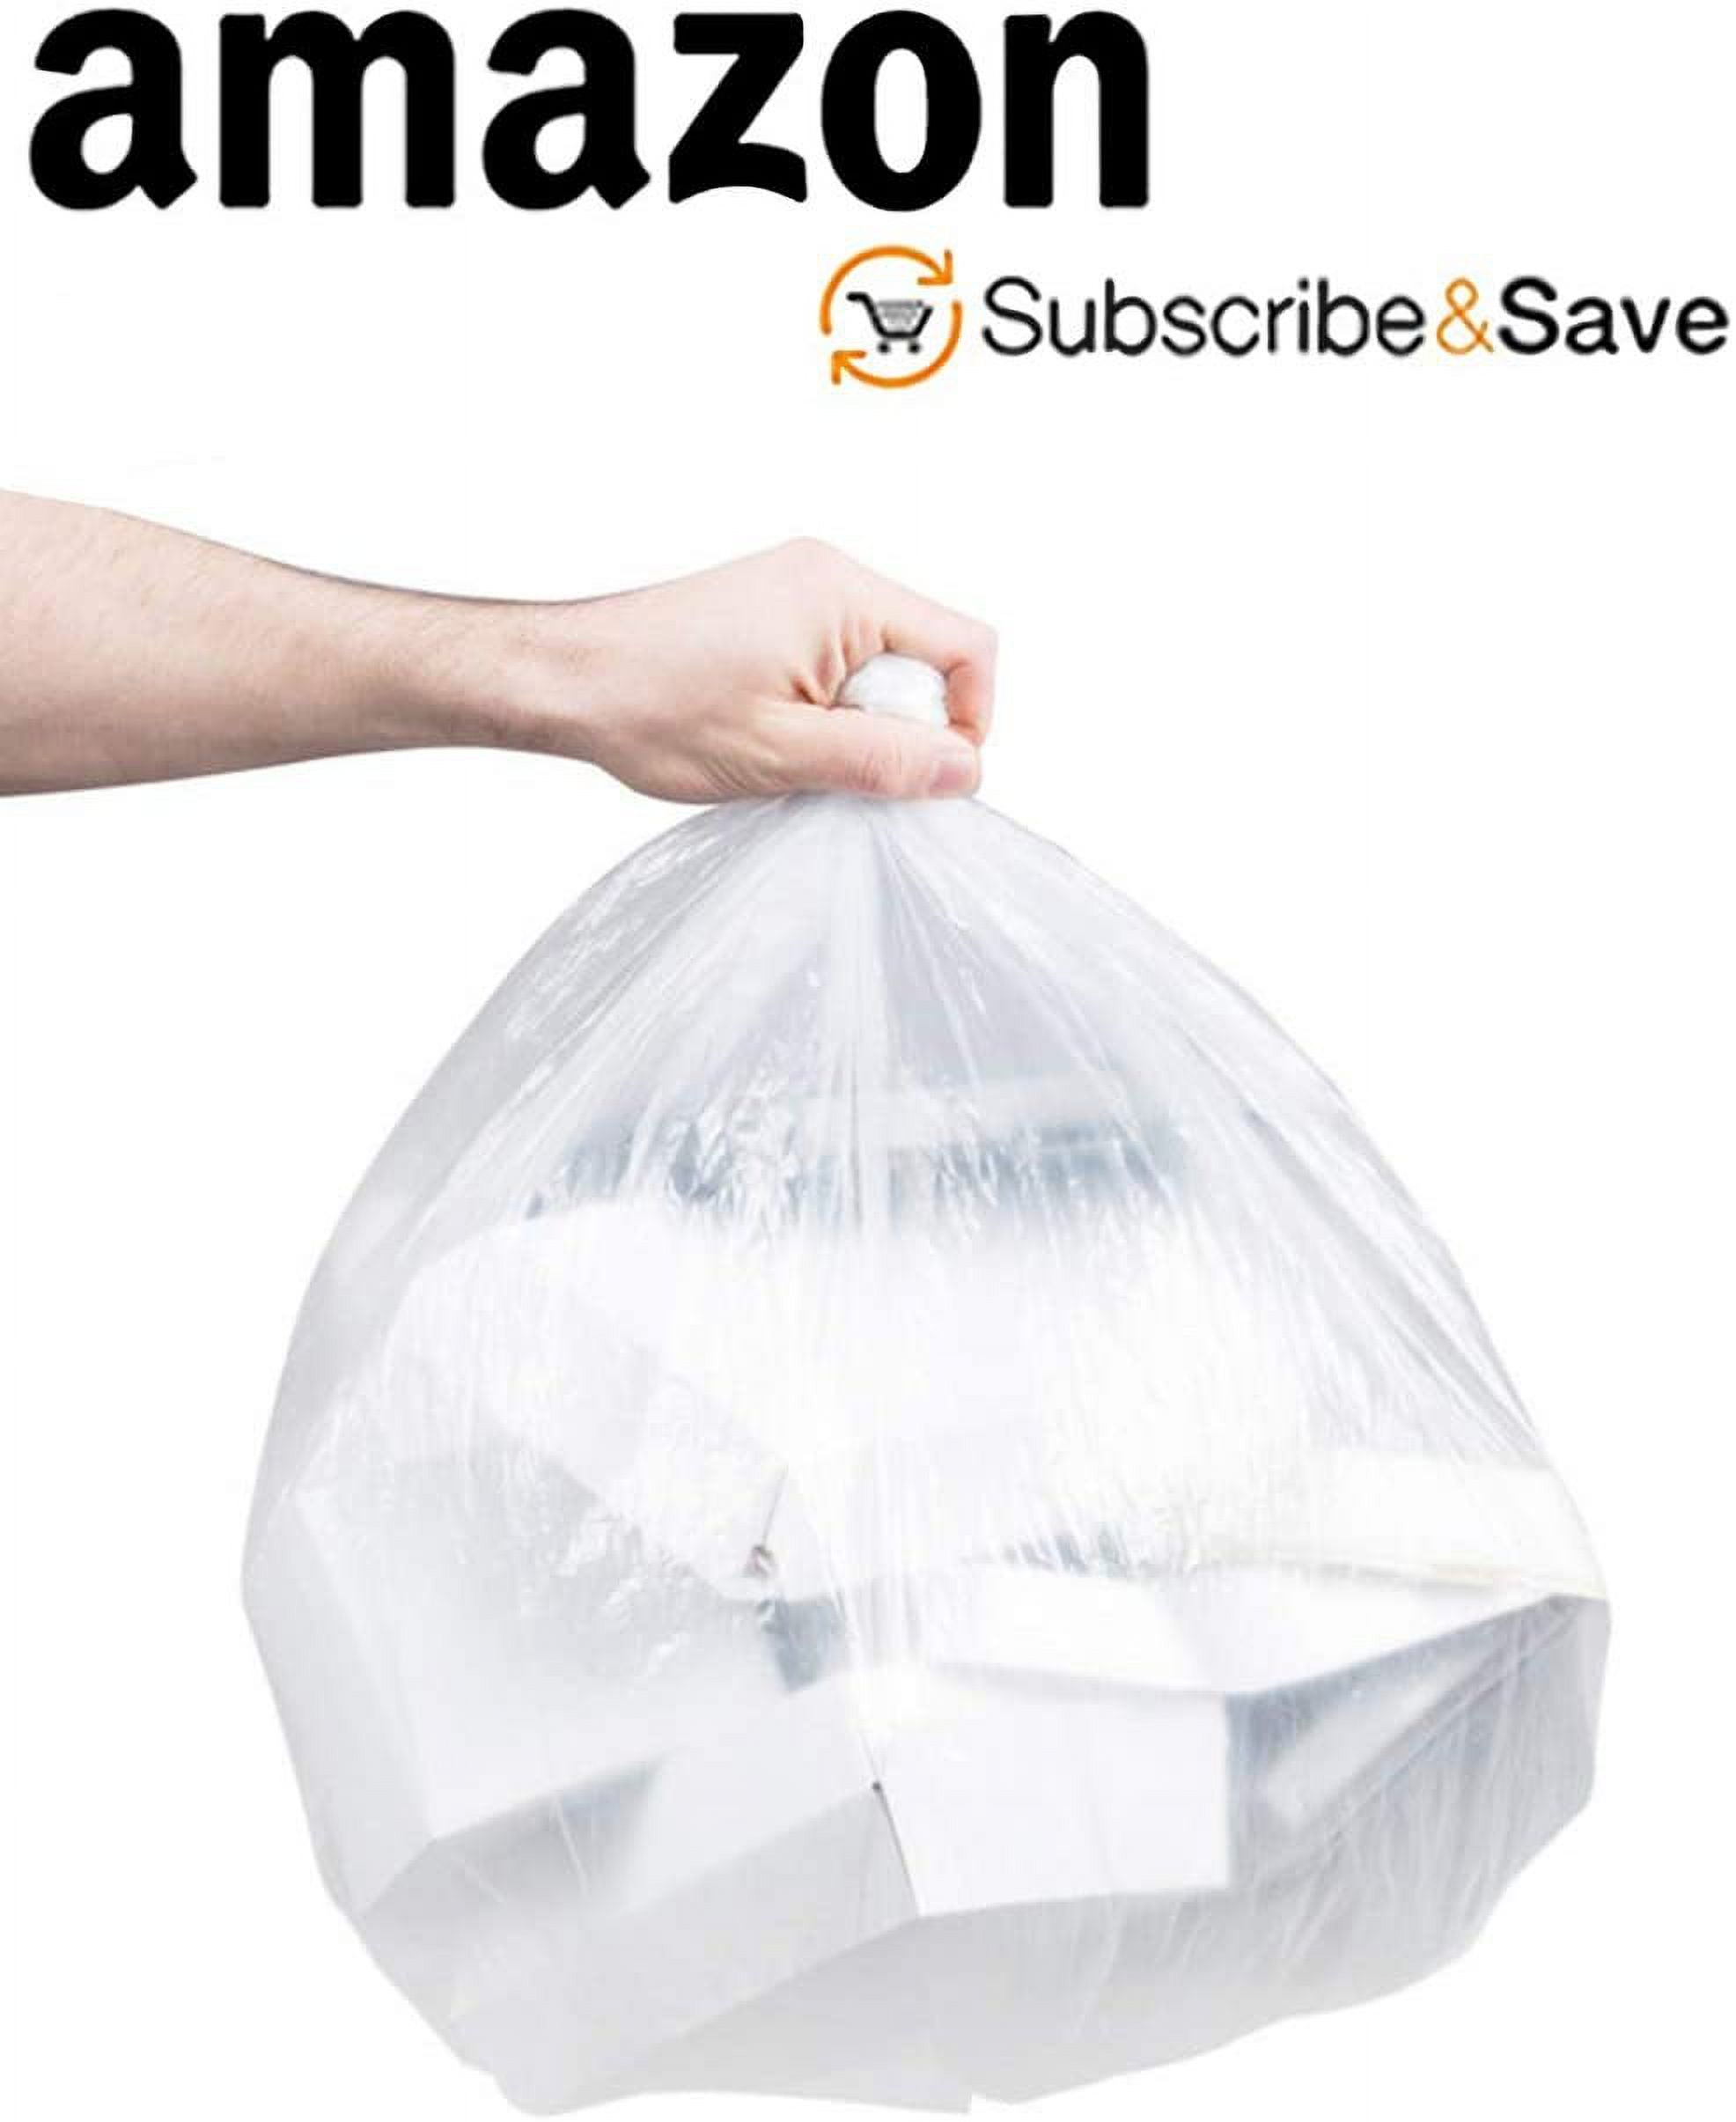 Commercial trash bags 10 gallon 24x23 5 mic case of 1000